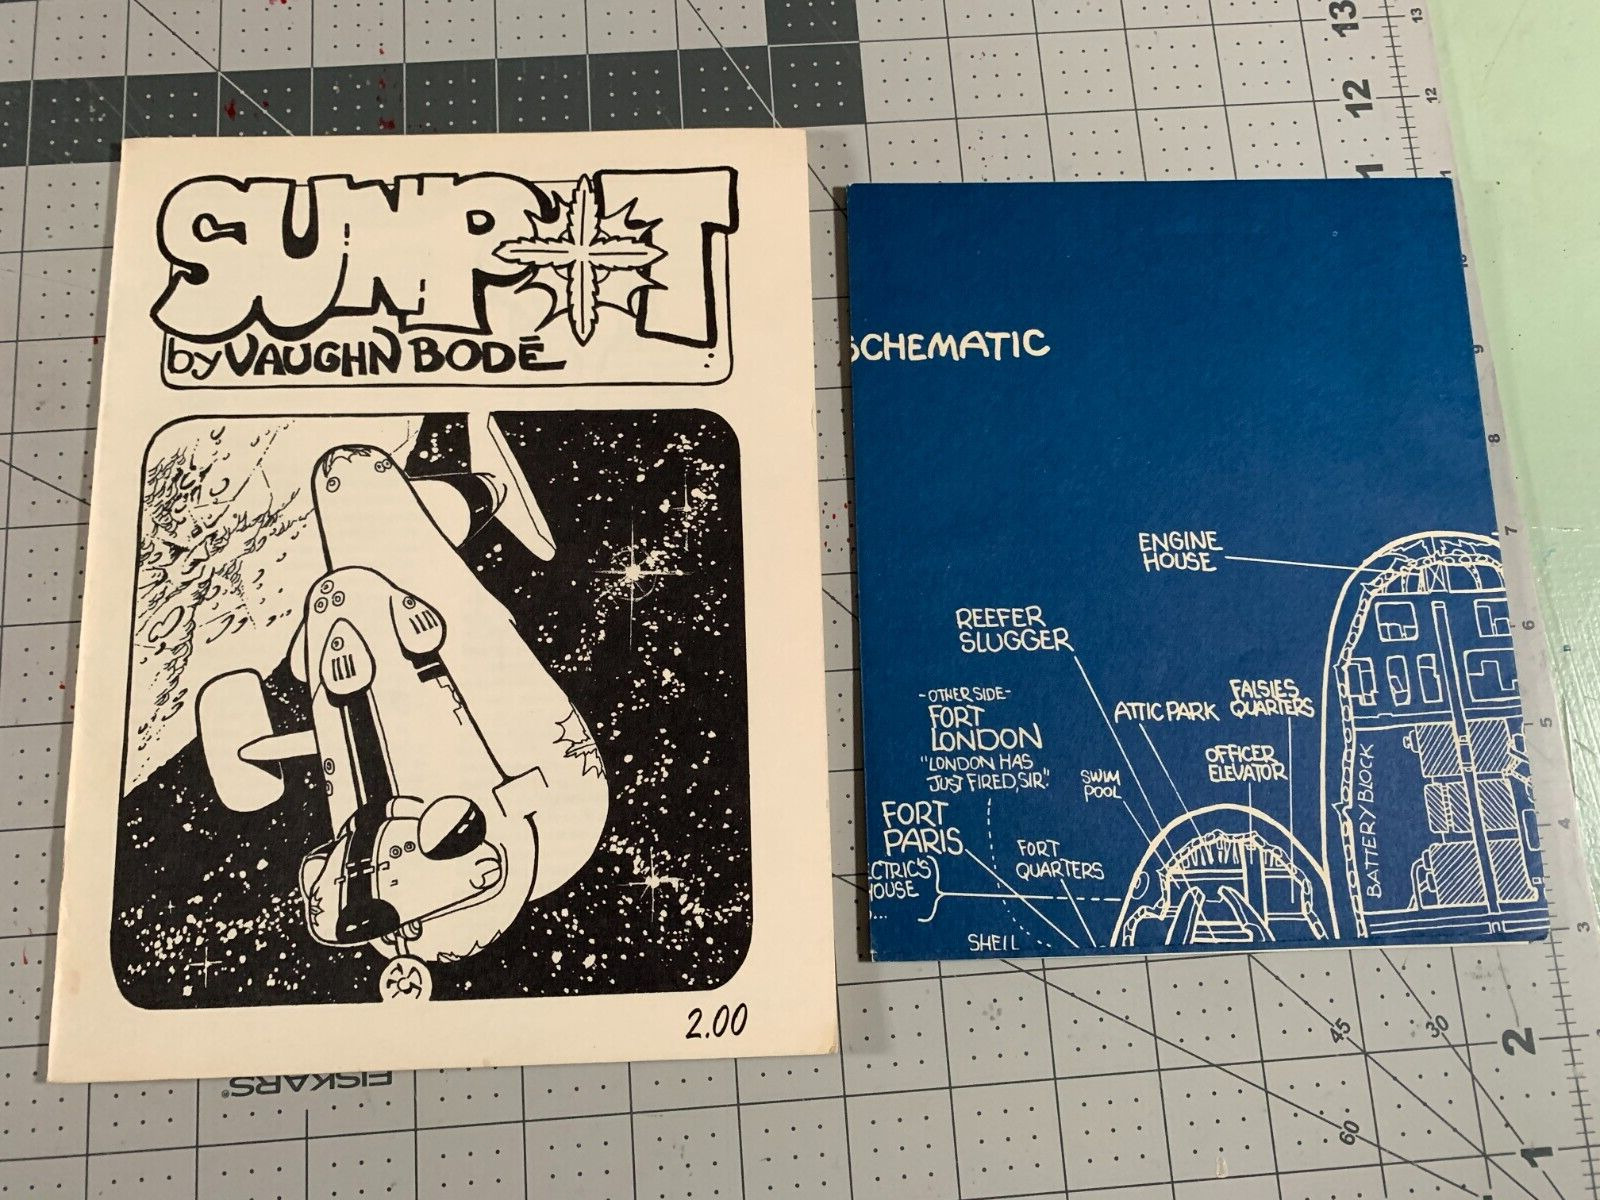 Sunpot Comics by Vaughn Bode 1971 With Spaceship Schematic Poster First Printing